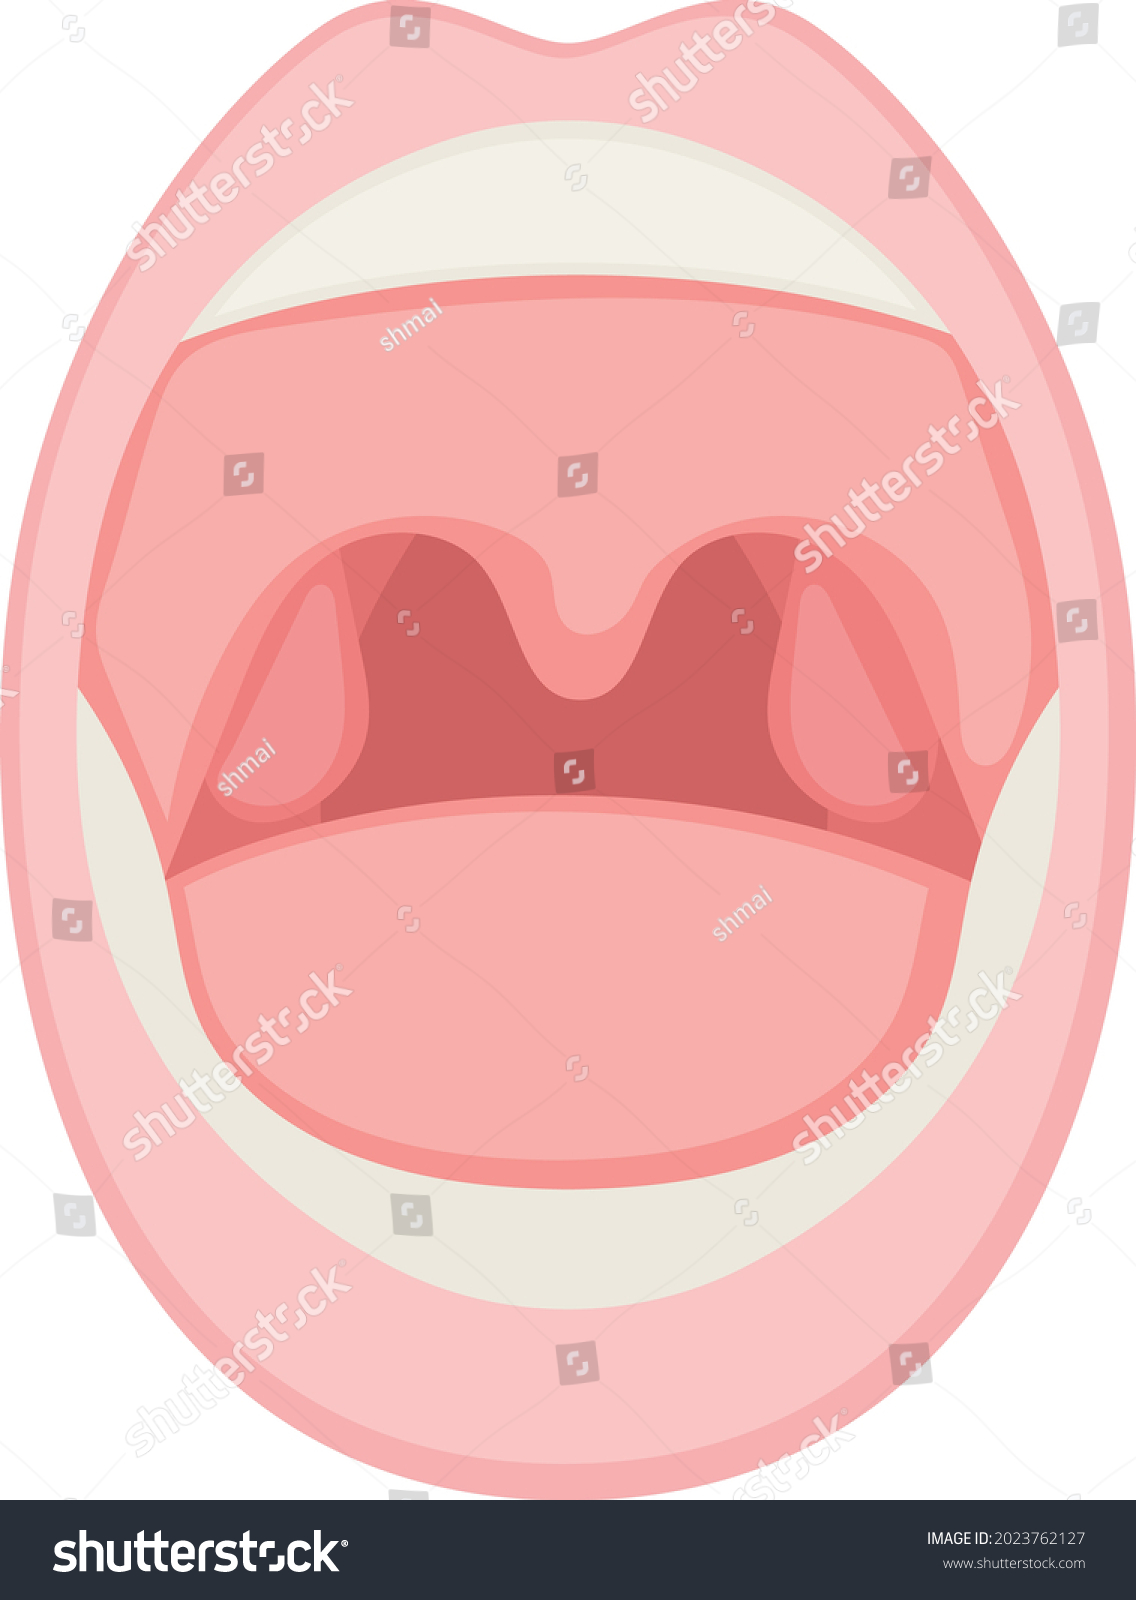 Human Mouth Concept Throat Tonsils Vector Stock Vector Royalty Free